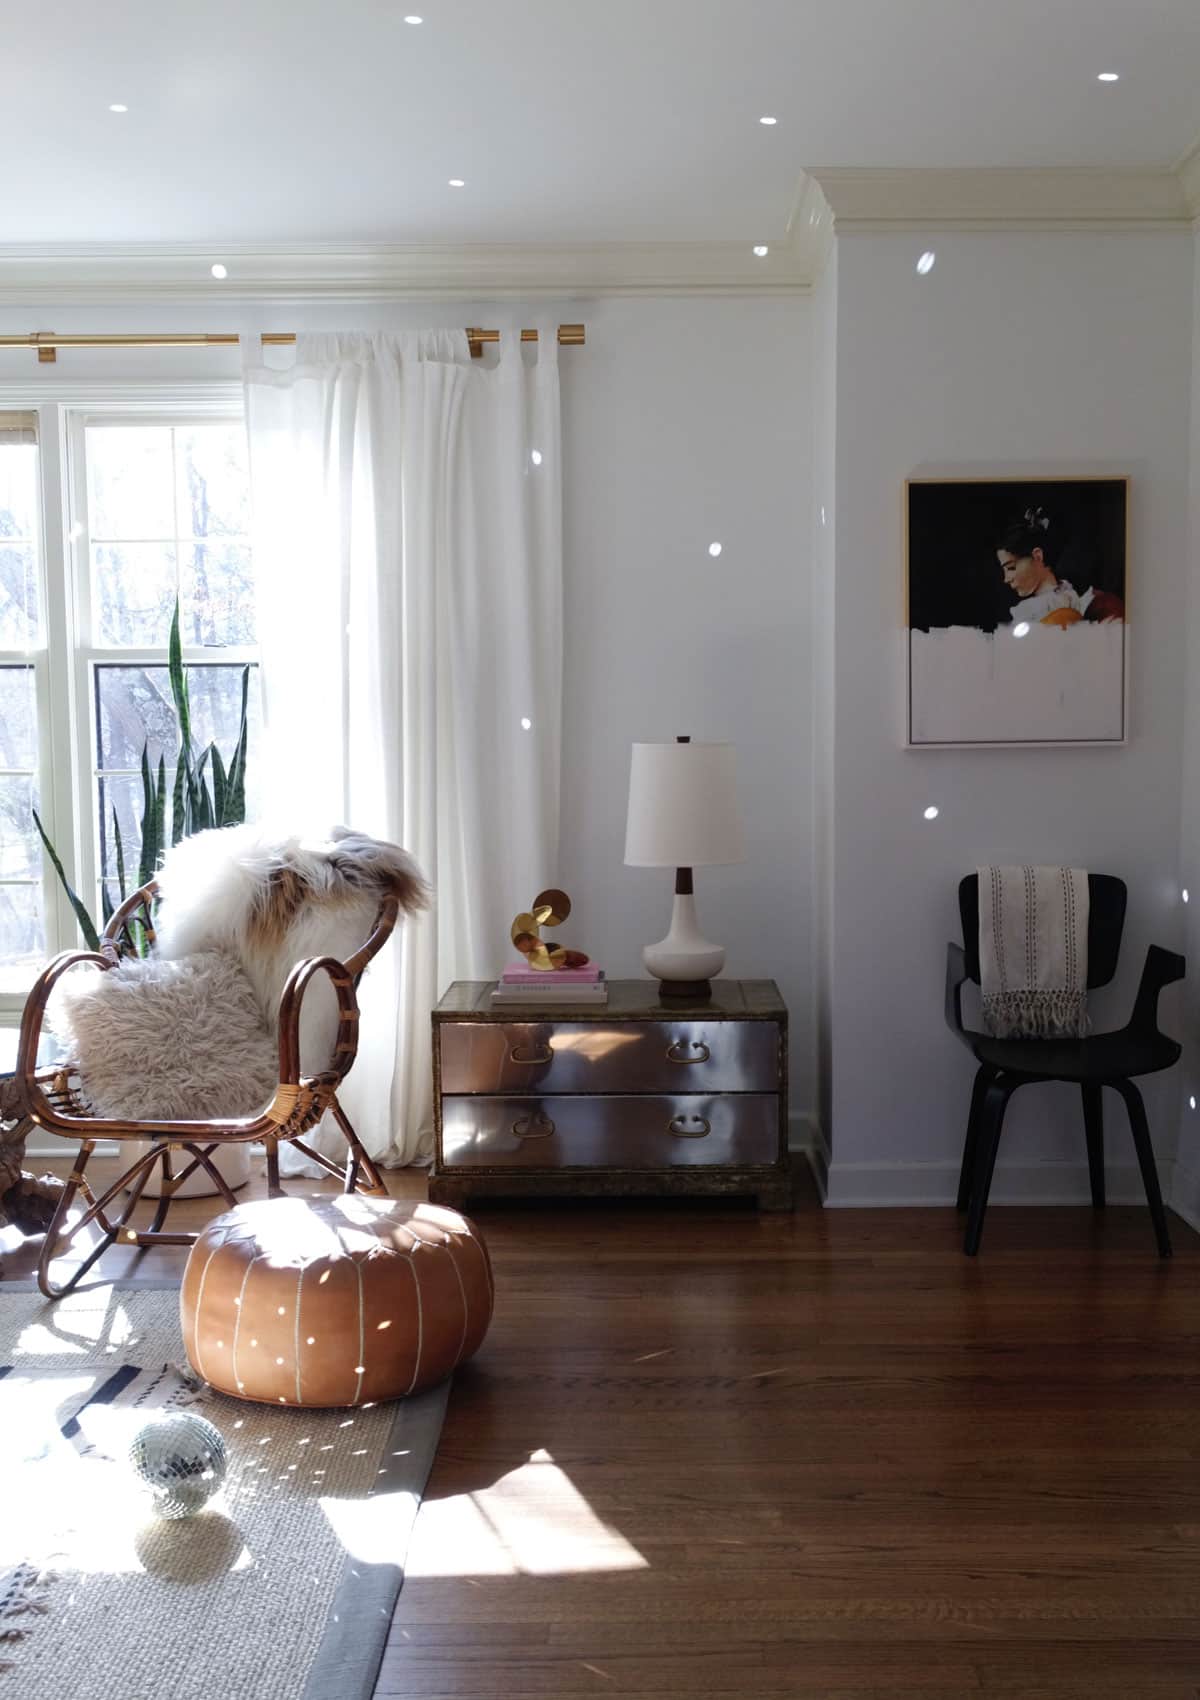 Disco Ball Decorating Ideas - Find the sun and set the disco ball down on the floor.